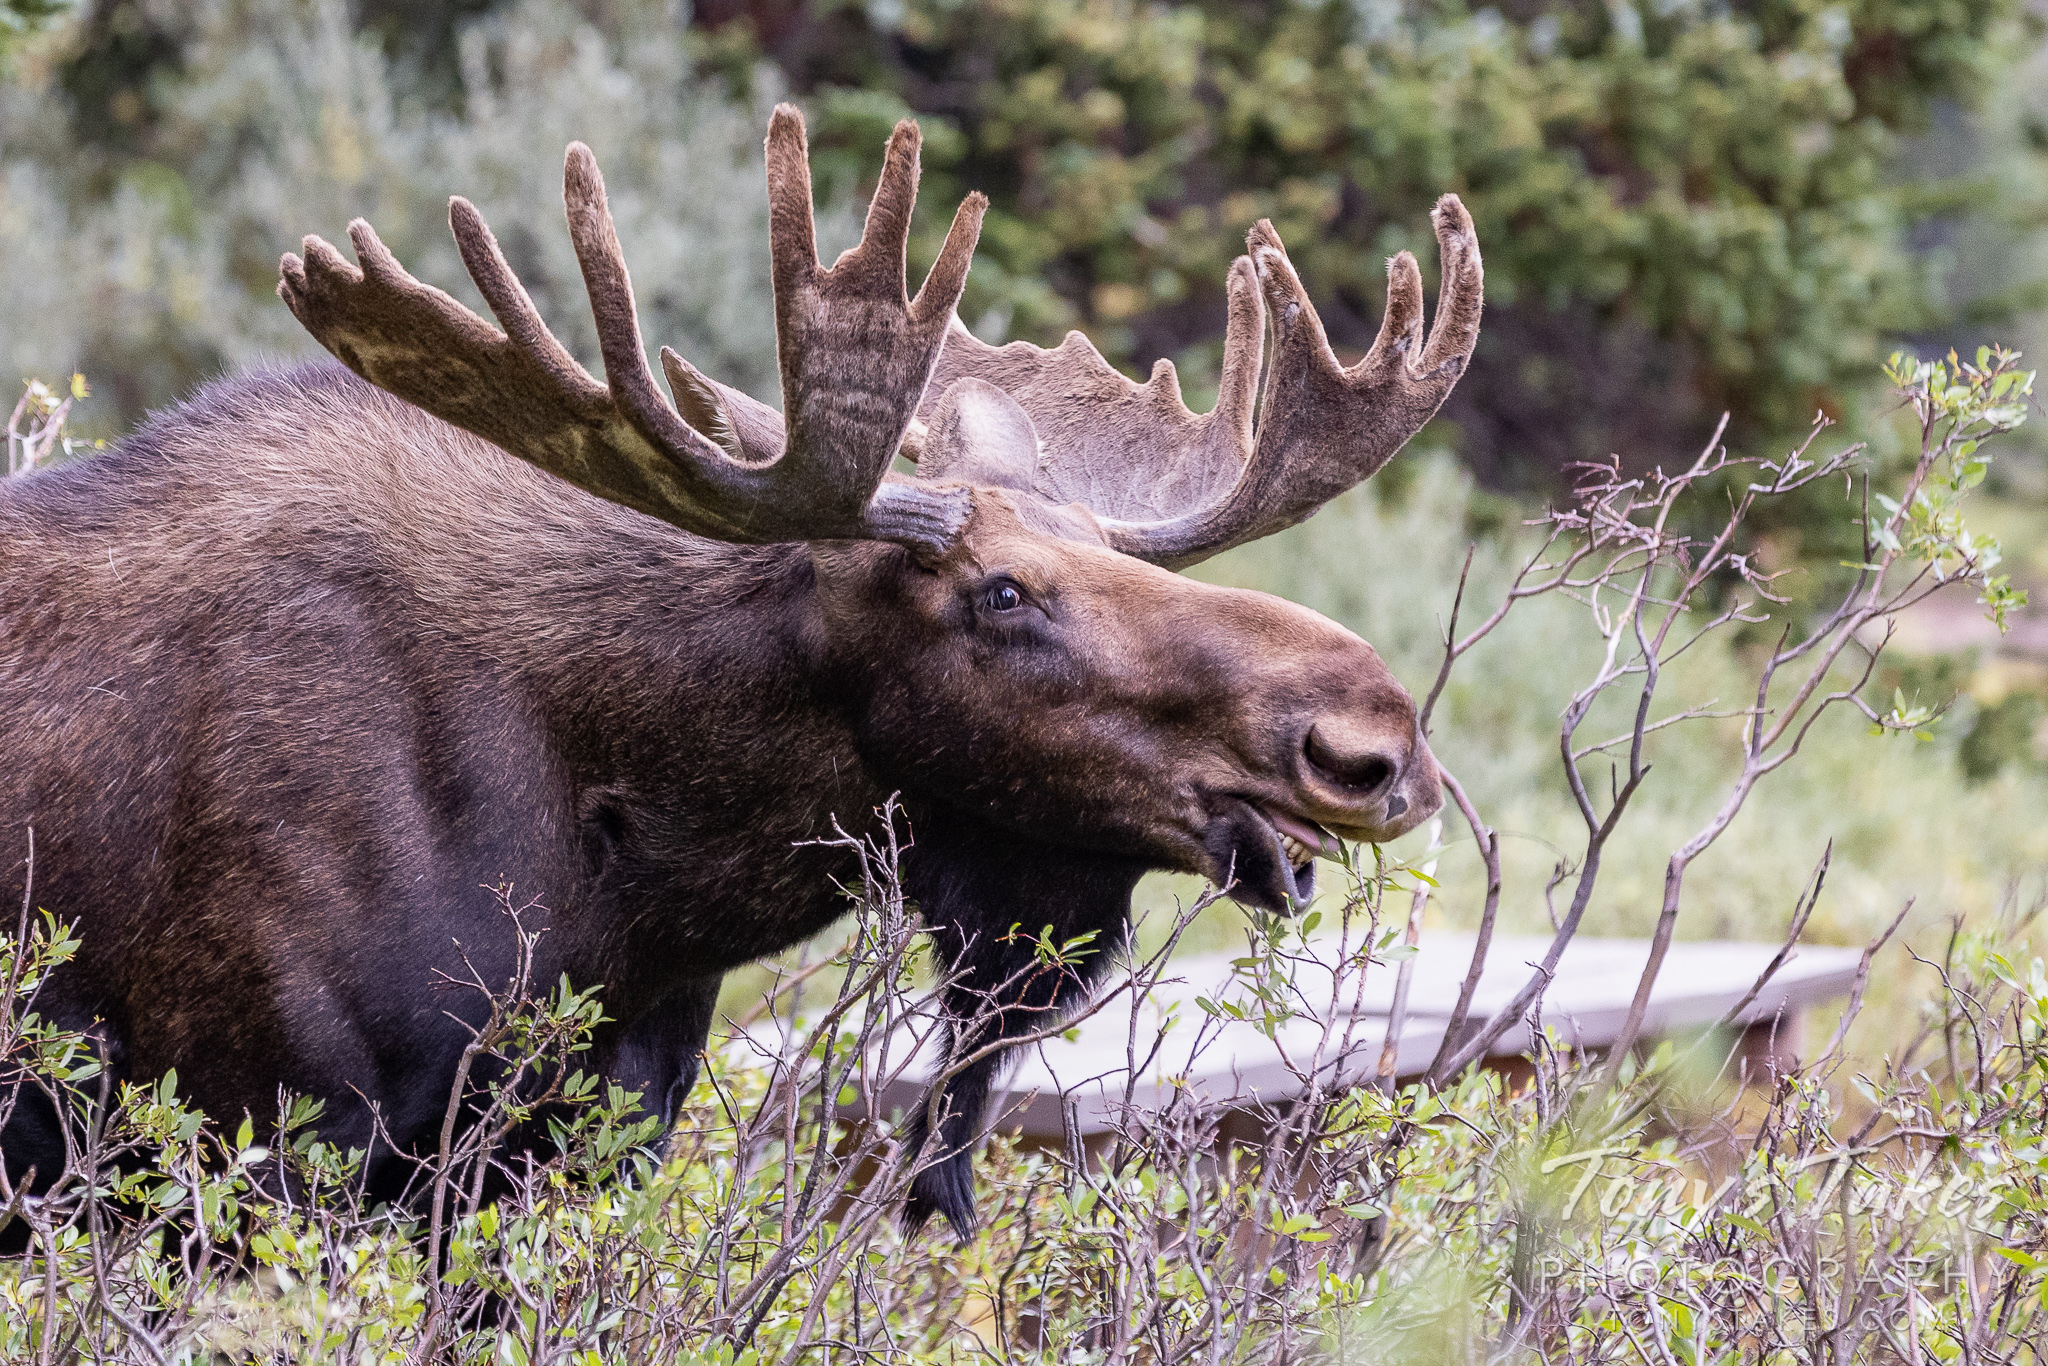 Bull moose takes over the picnic area